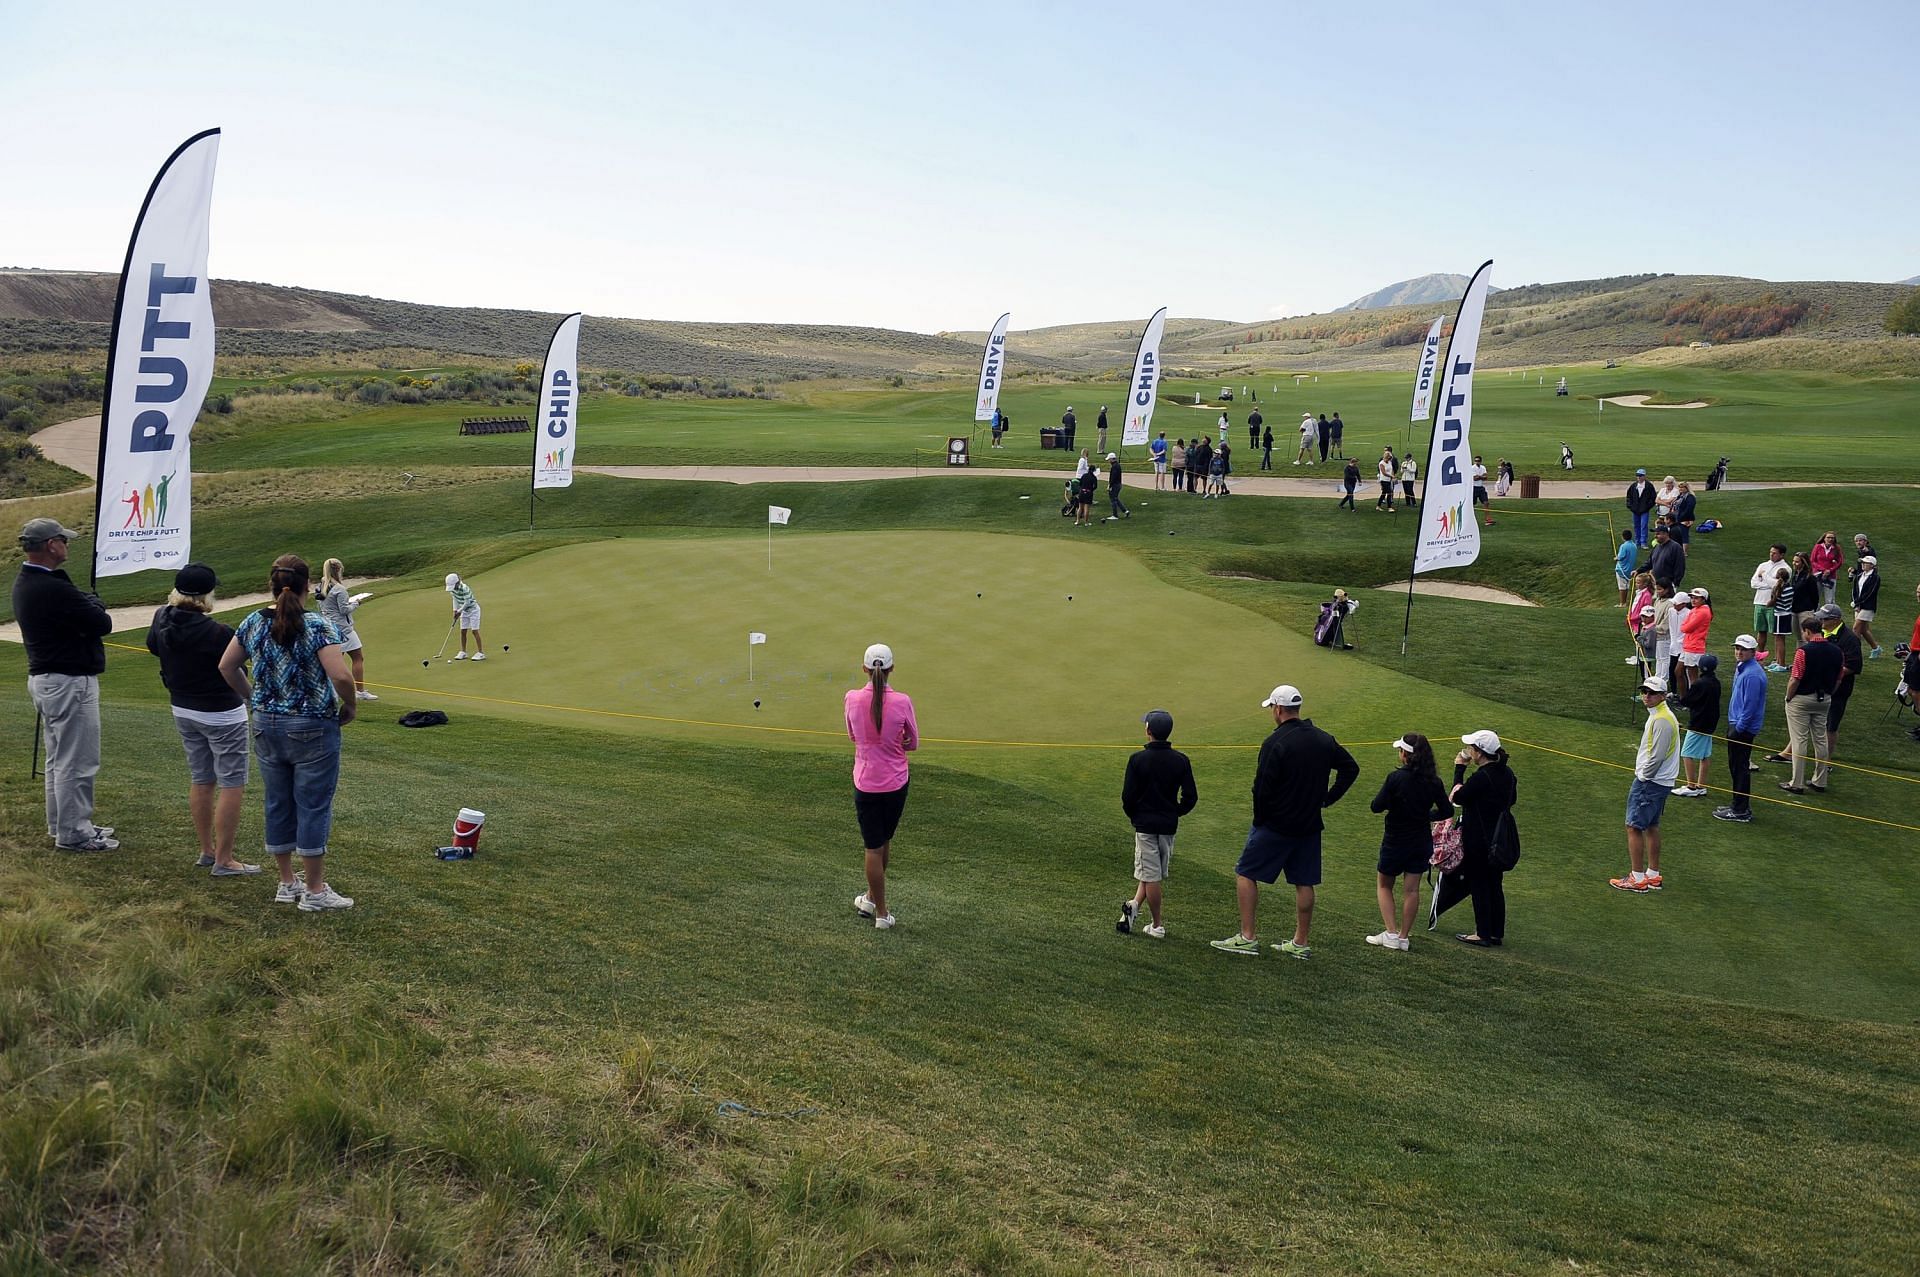 The Drive, Chip and Putt Championship-Promontory Nicklaus Course Park City